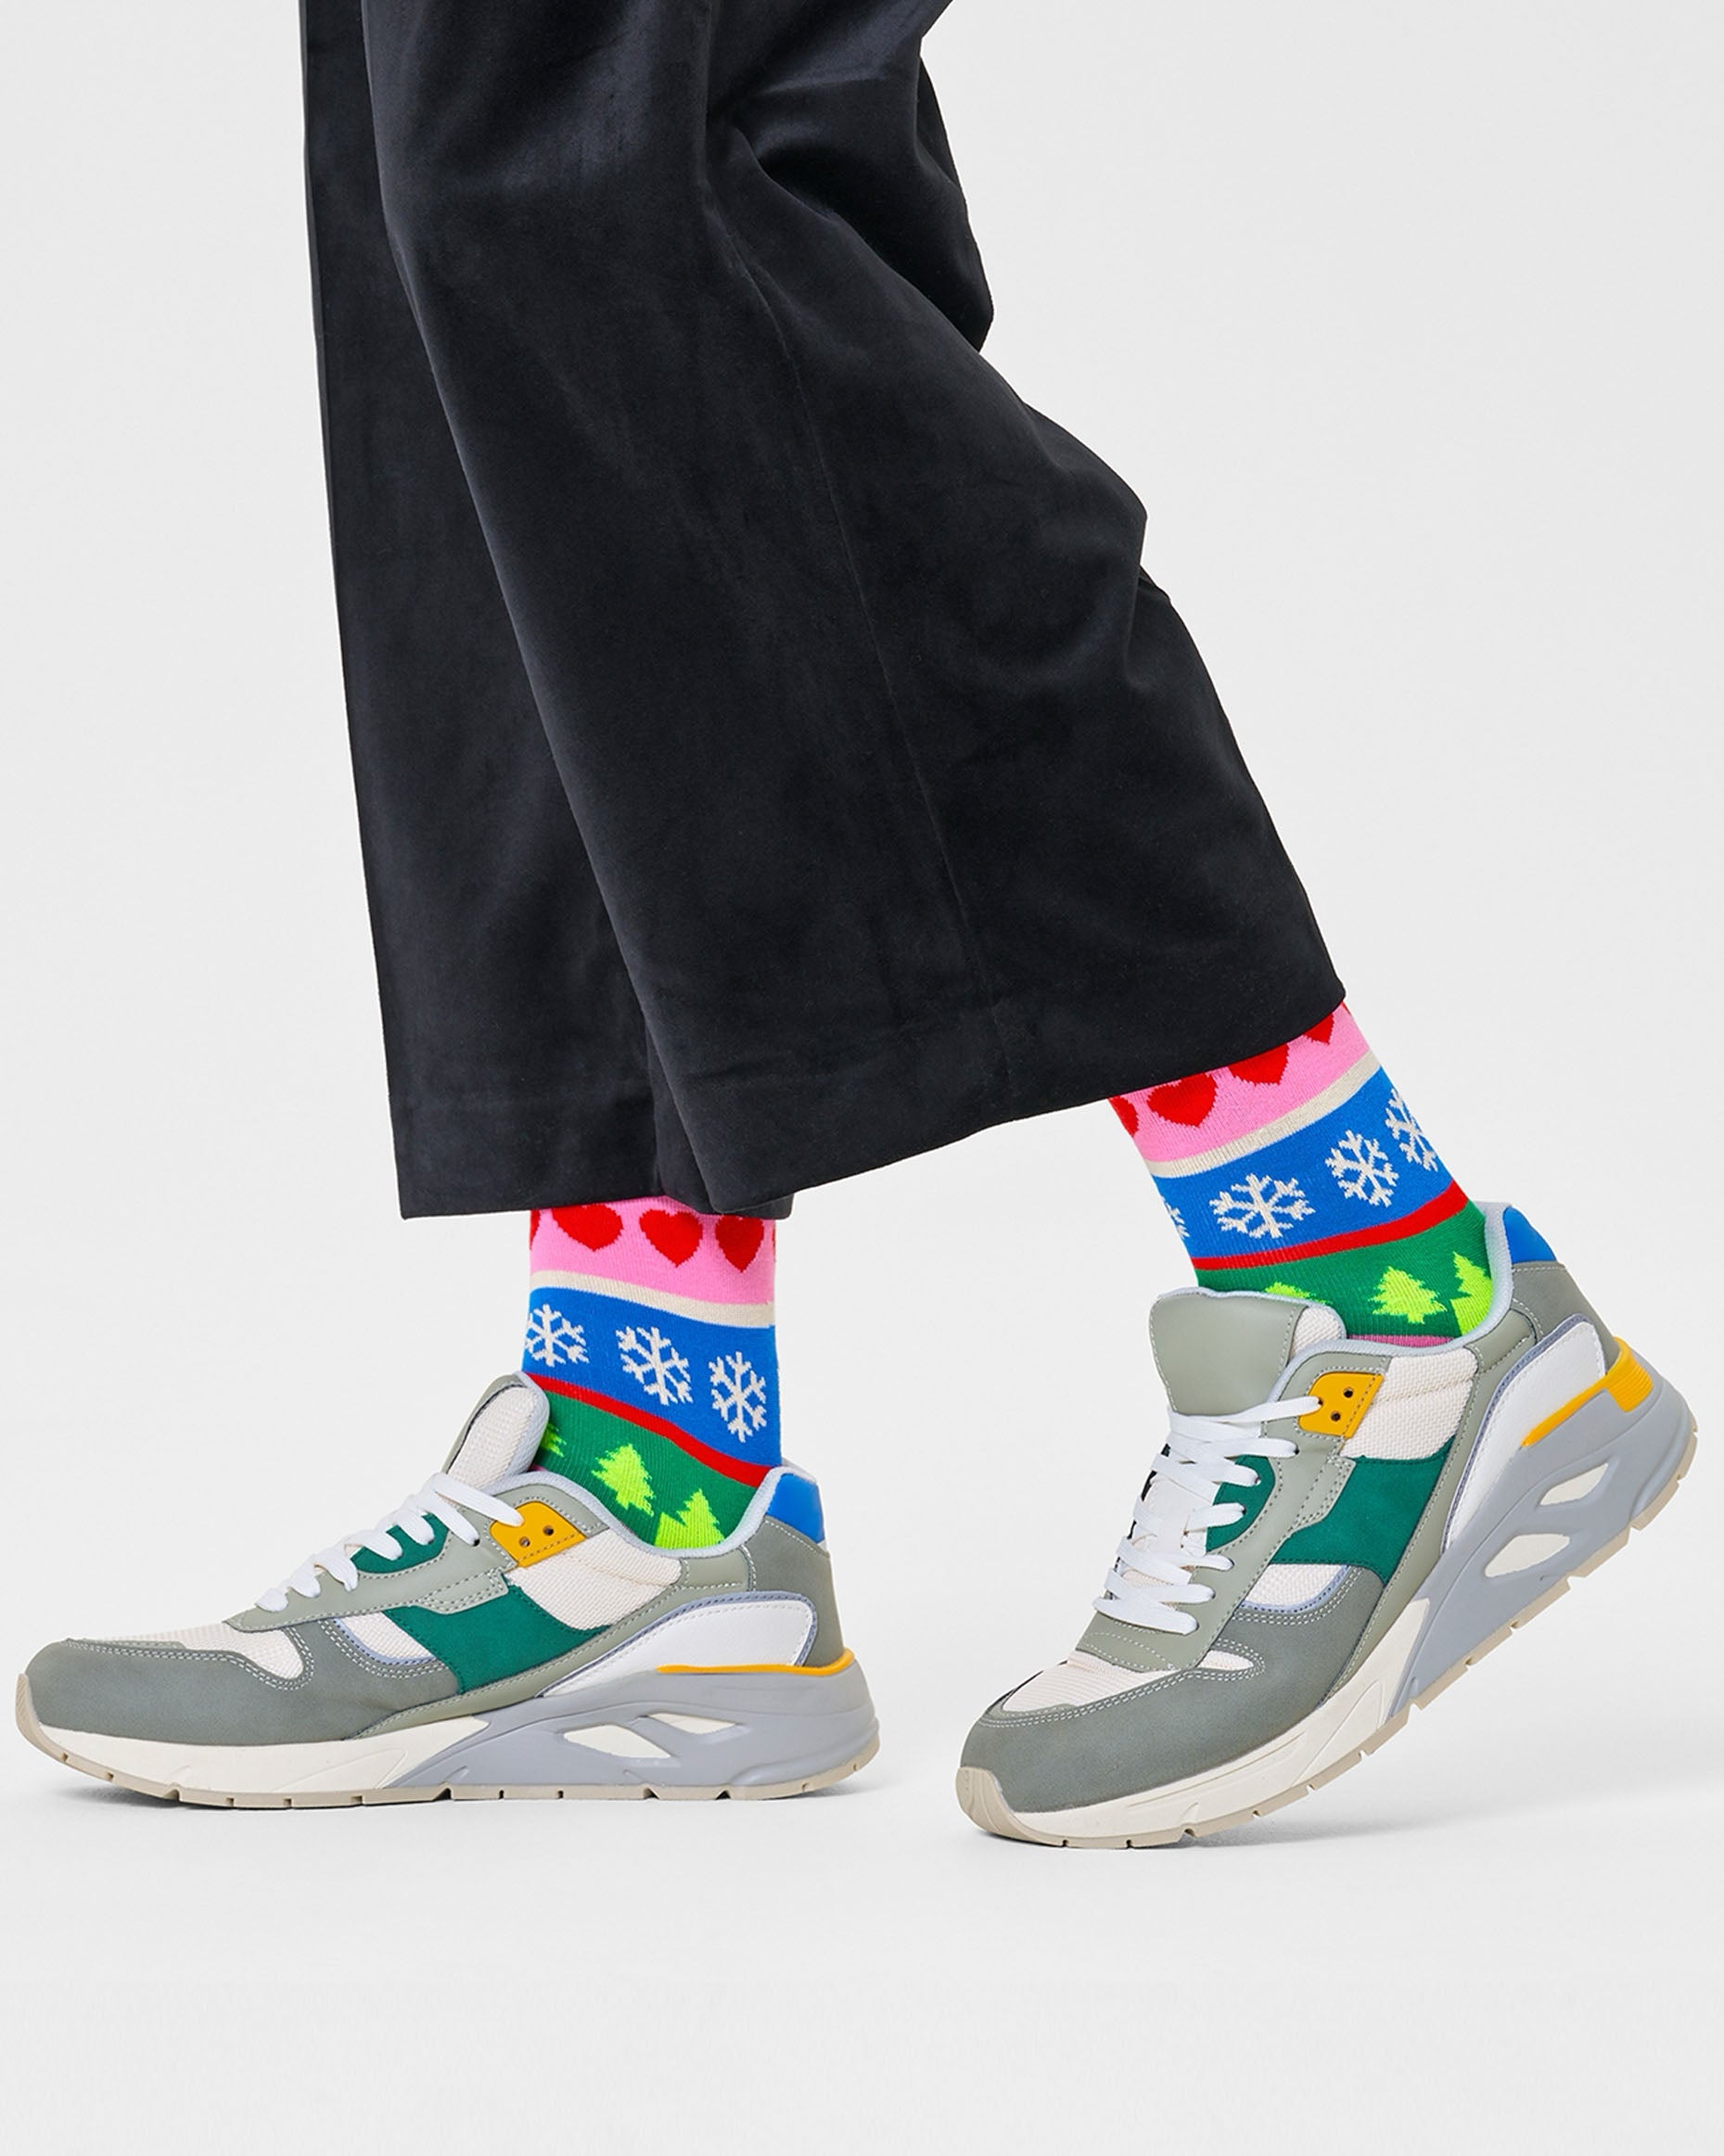 Happy Sock P000265 Christmas Stripe Sock - colourful novelty Xmas socks with snowflakes, reindeer, hearts and Xmas trees. Worn with navy velvet cropped pants and trainers.